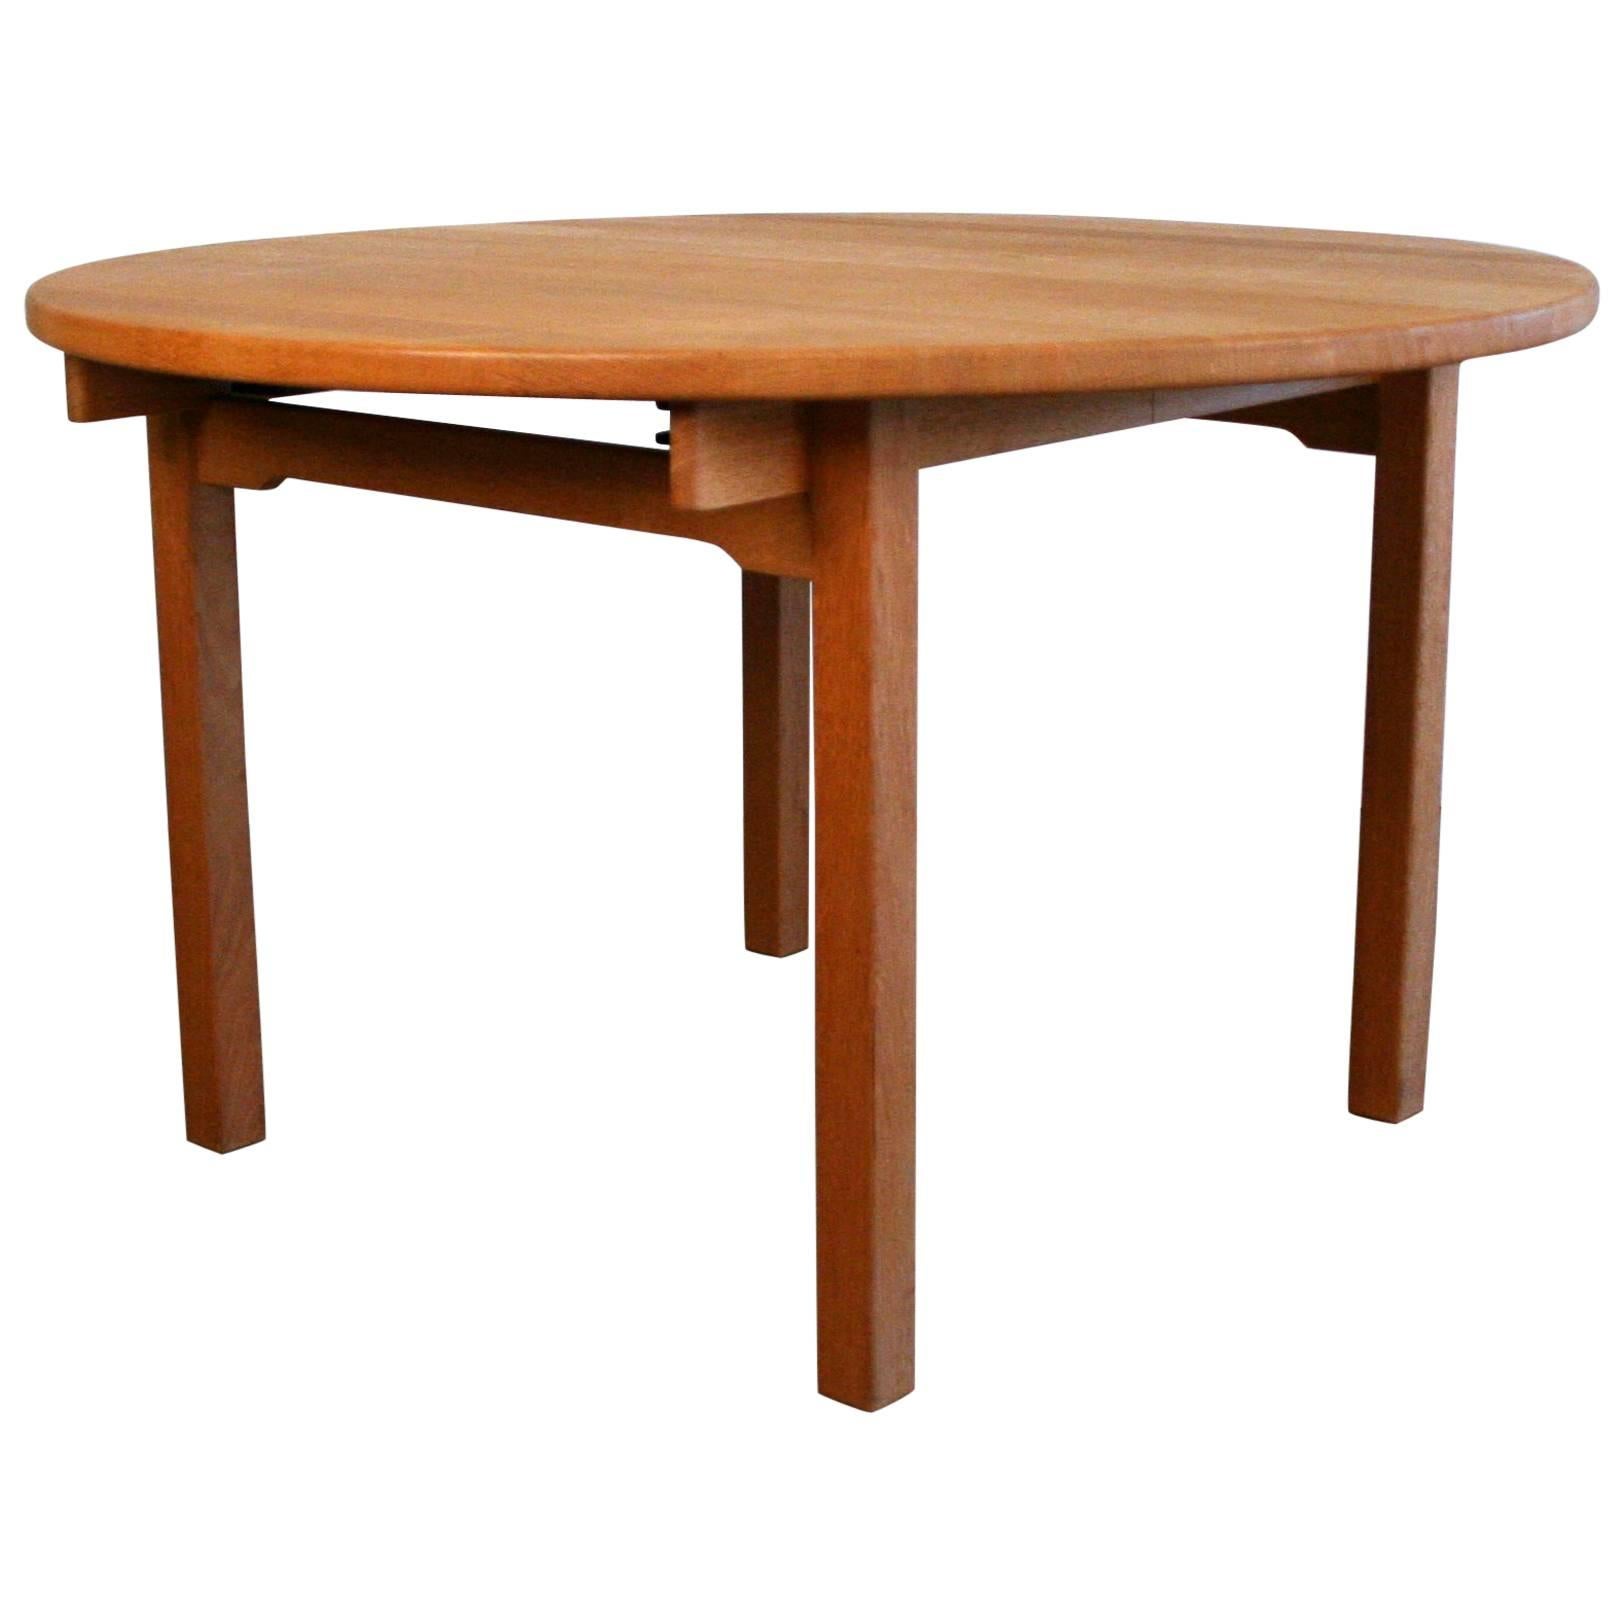 Vintage Danish Solid Oak Round Dining Table by Kurt Osterberg For Sale